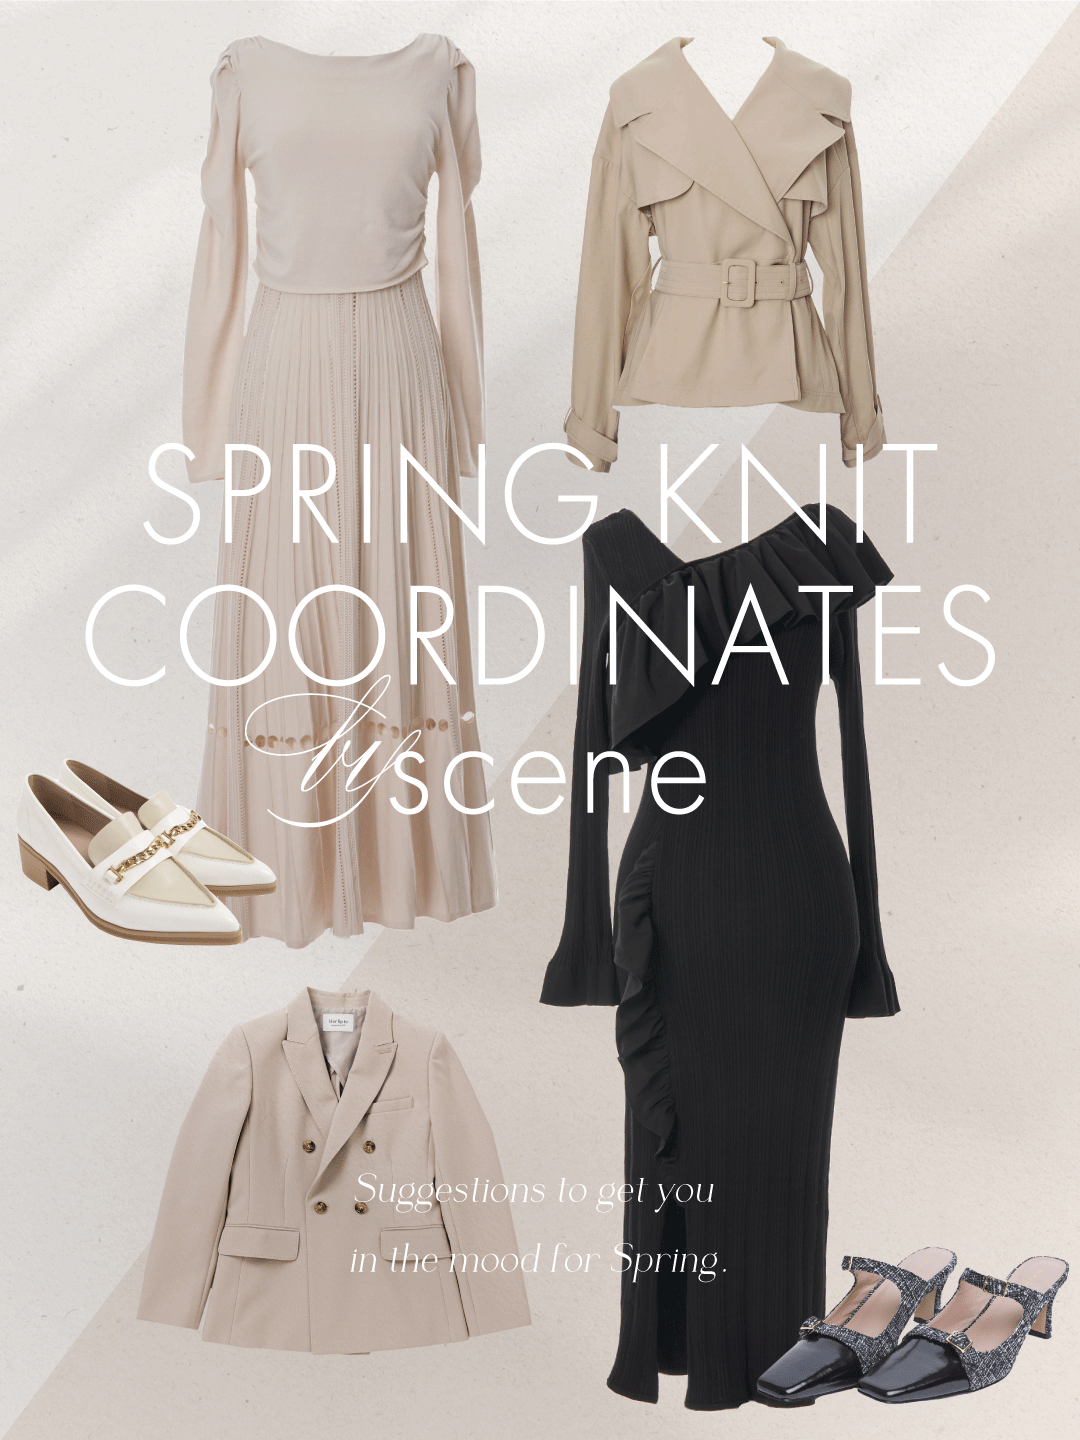 Spring knit Coordinates by scene